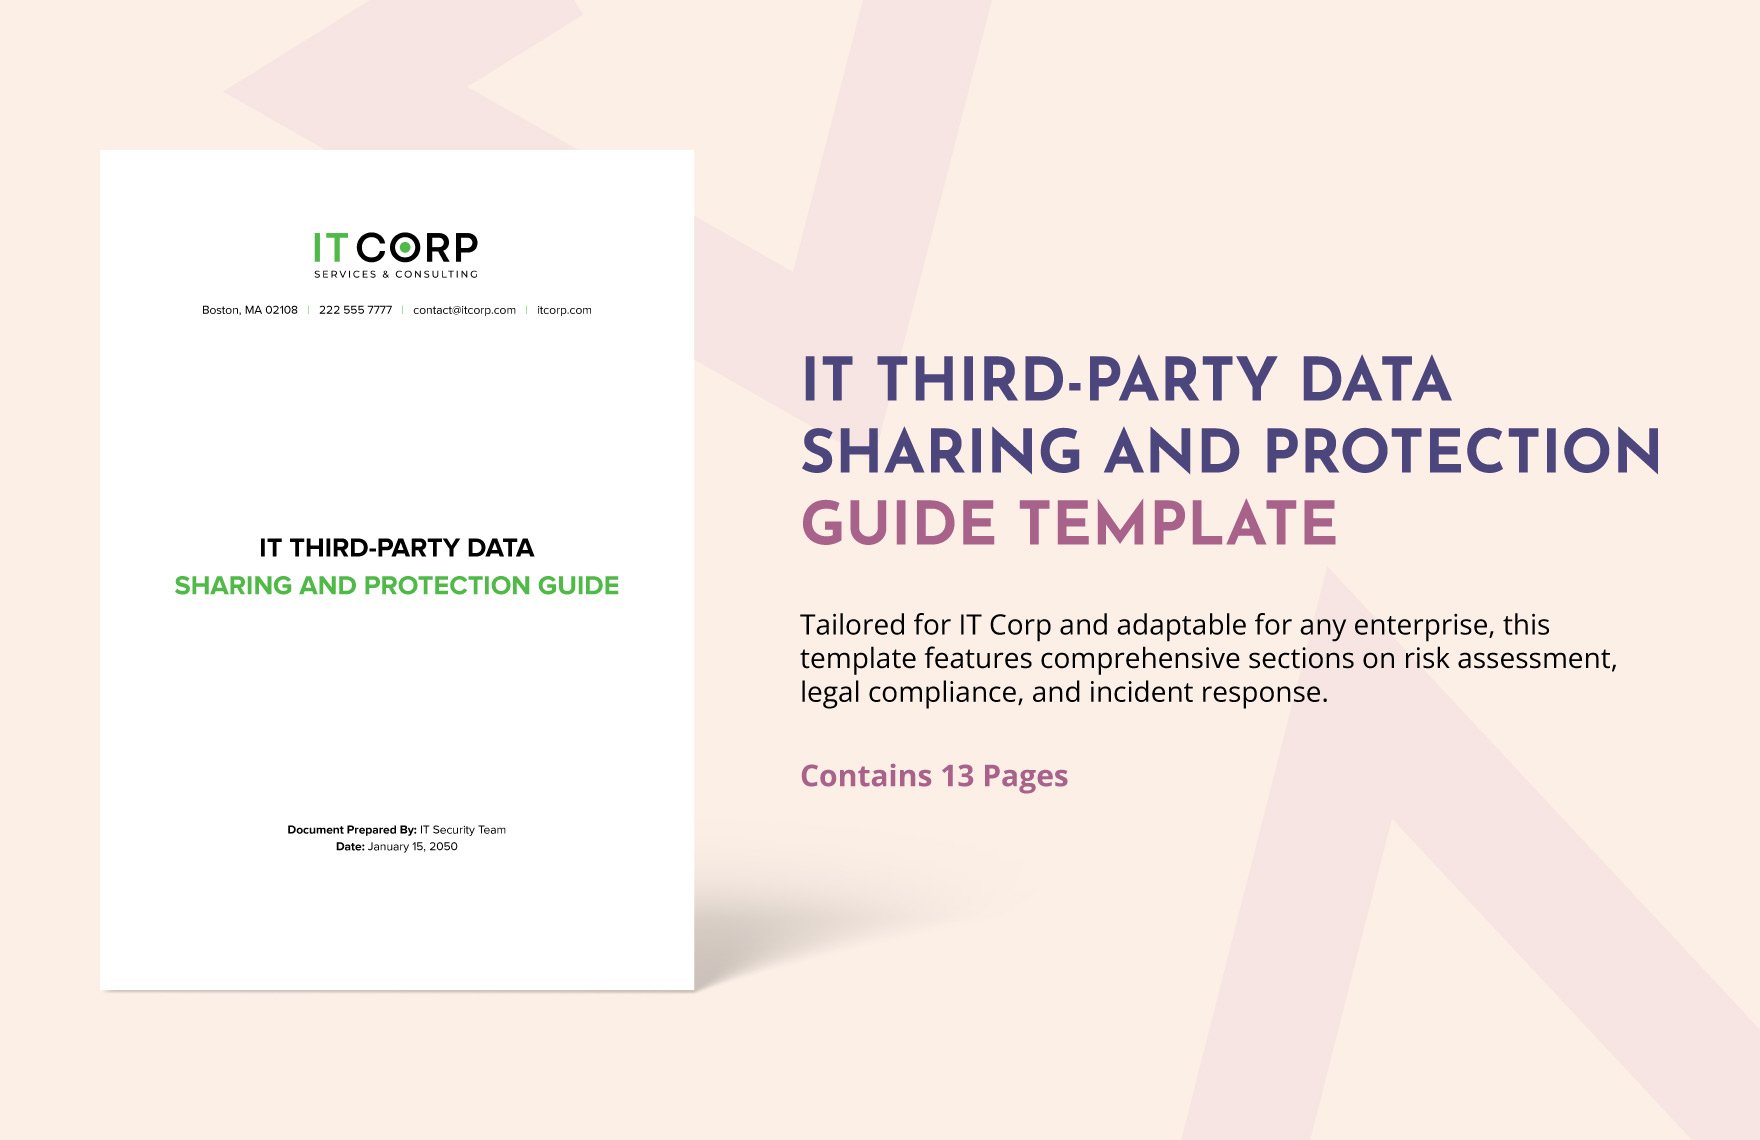 IT Third-party Data Sharing and Protection Guide Template